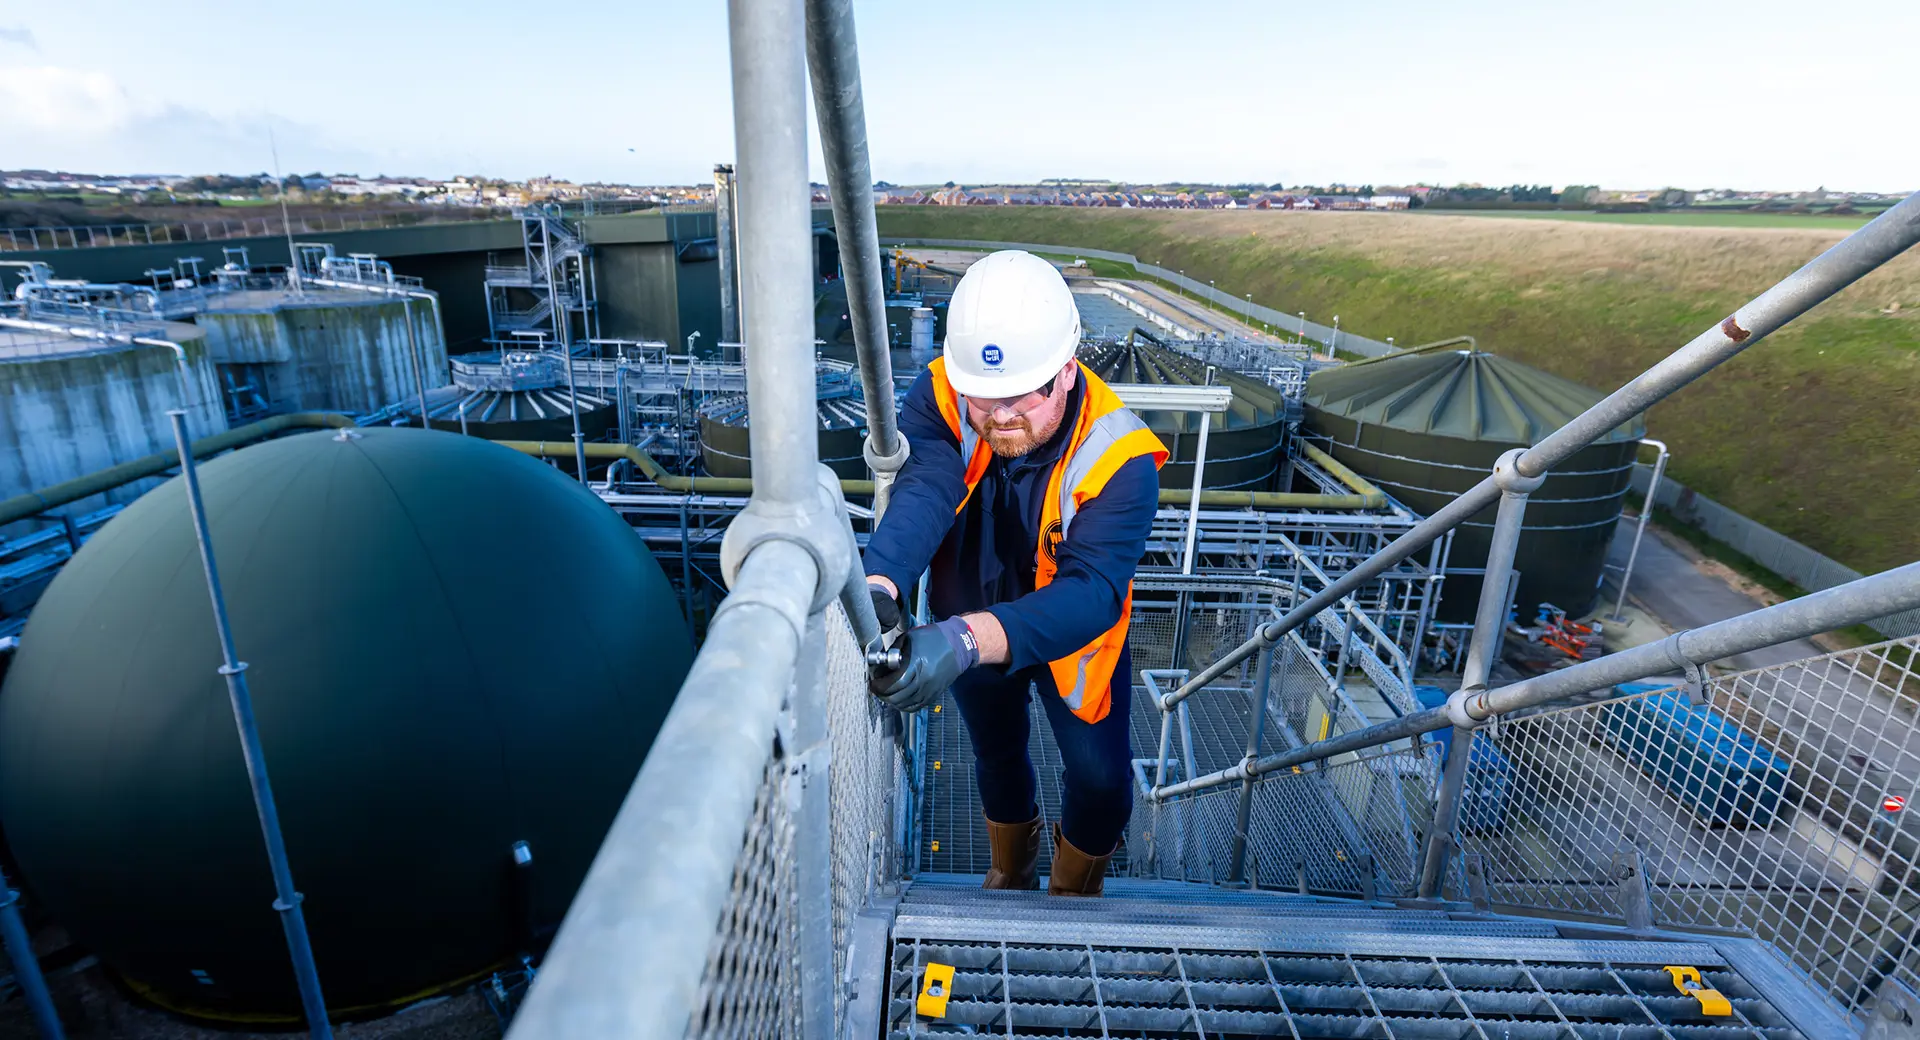 A Southern Water engineer works outdoors at the Peacehaven Wastewater Treatment Works